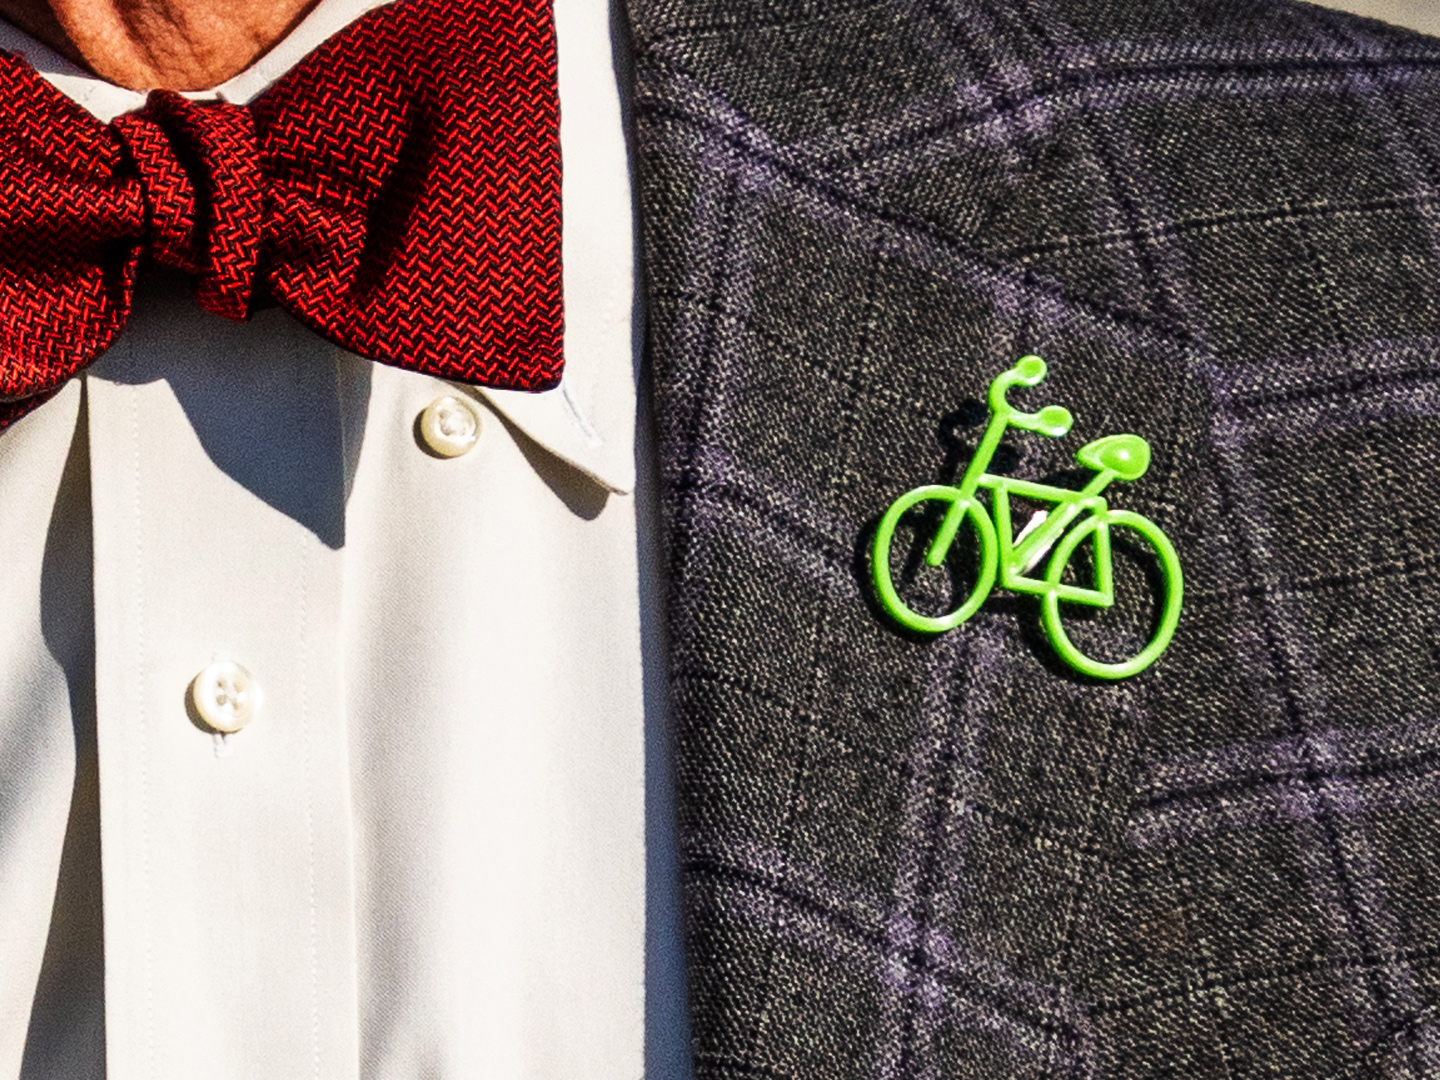 Close-up image of the left shoulder of Congressman Blumenauer's suit jacket. His suit is dark grey wool with light and darker grey plaid striping. His red bow tie is visible, and he wears a pin of a bright green bicycle on the lapel of his jacket.